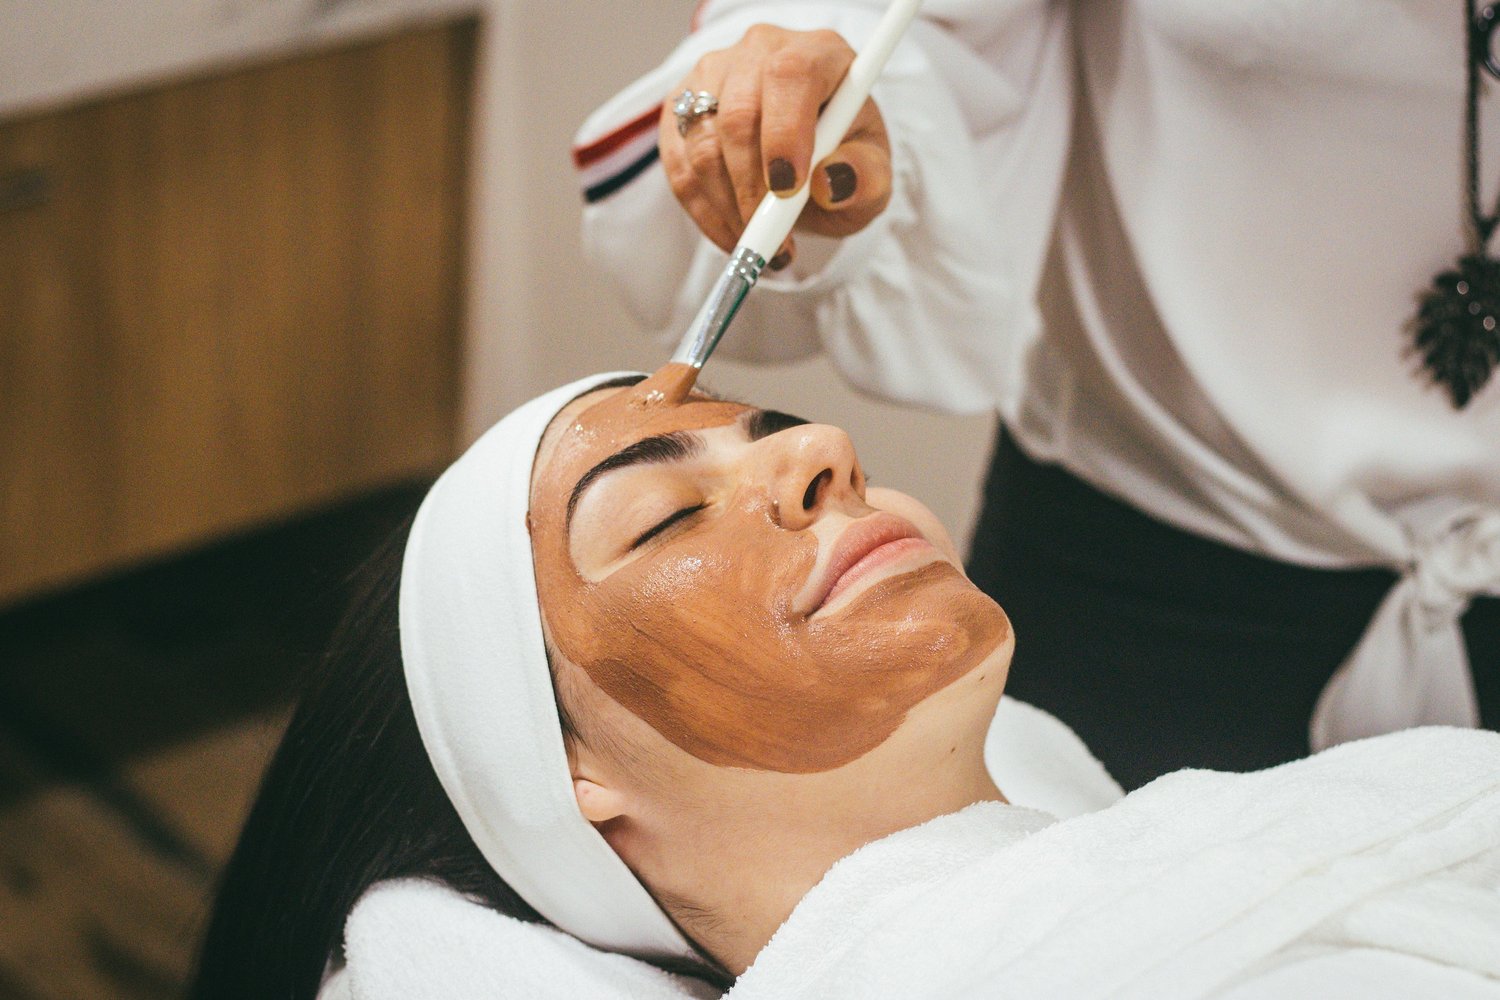 Pamper Yourself with the Best Facial in Jacksonville, FL, at Daisy's Skin Transformation